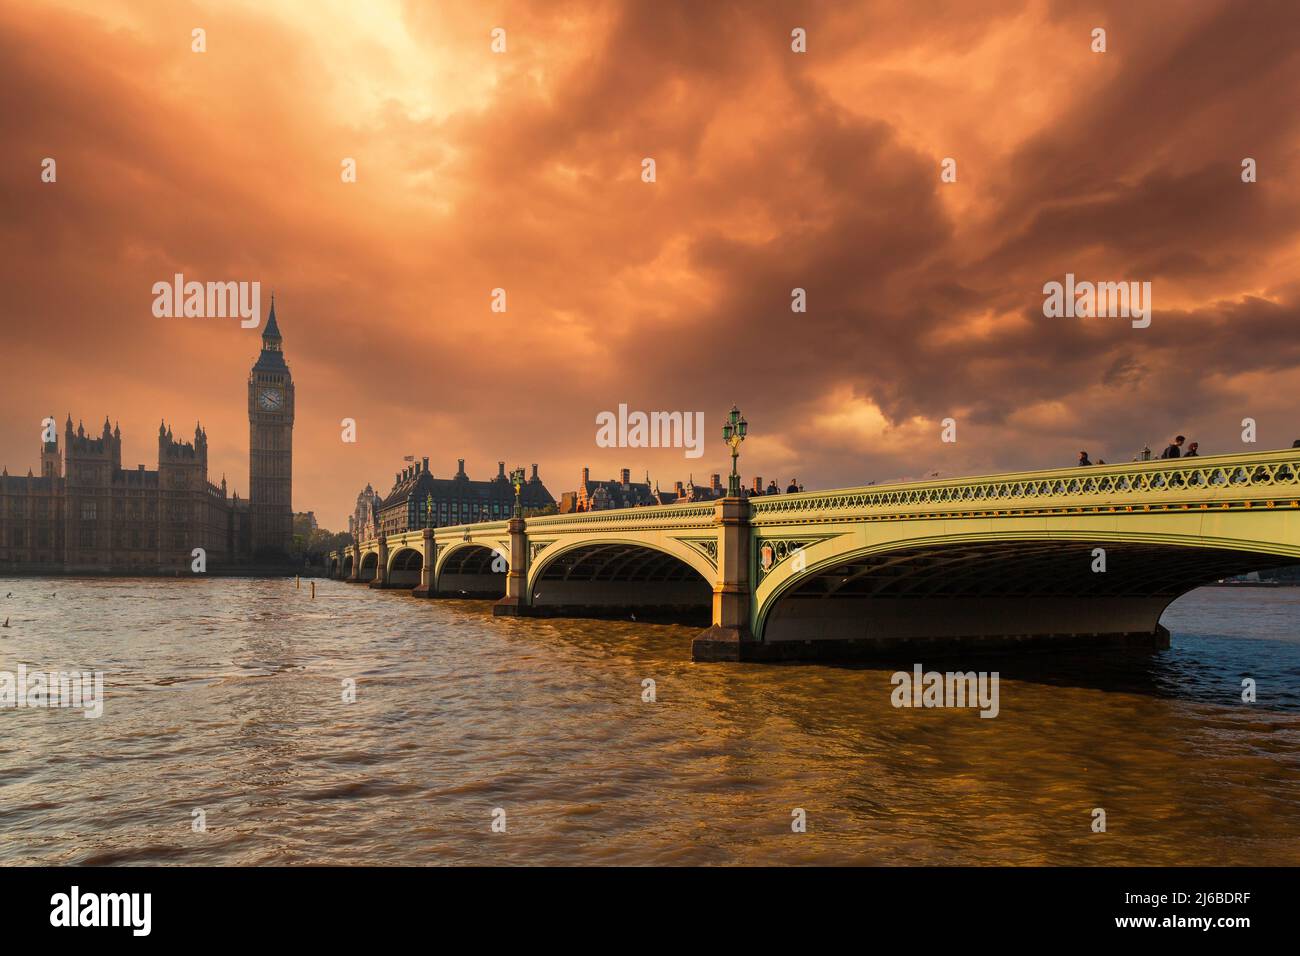 London Westminster with Thames, Palace of Westminster, Houses of Parliament, Big Ben, Dusk dramatic sky, City of Westminster, England Stock Photo